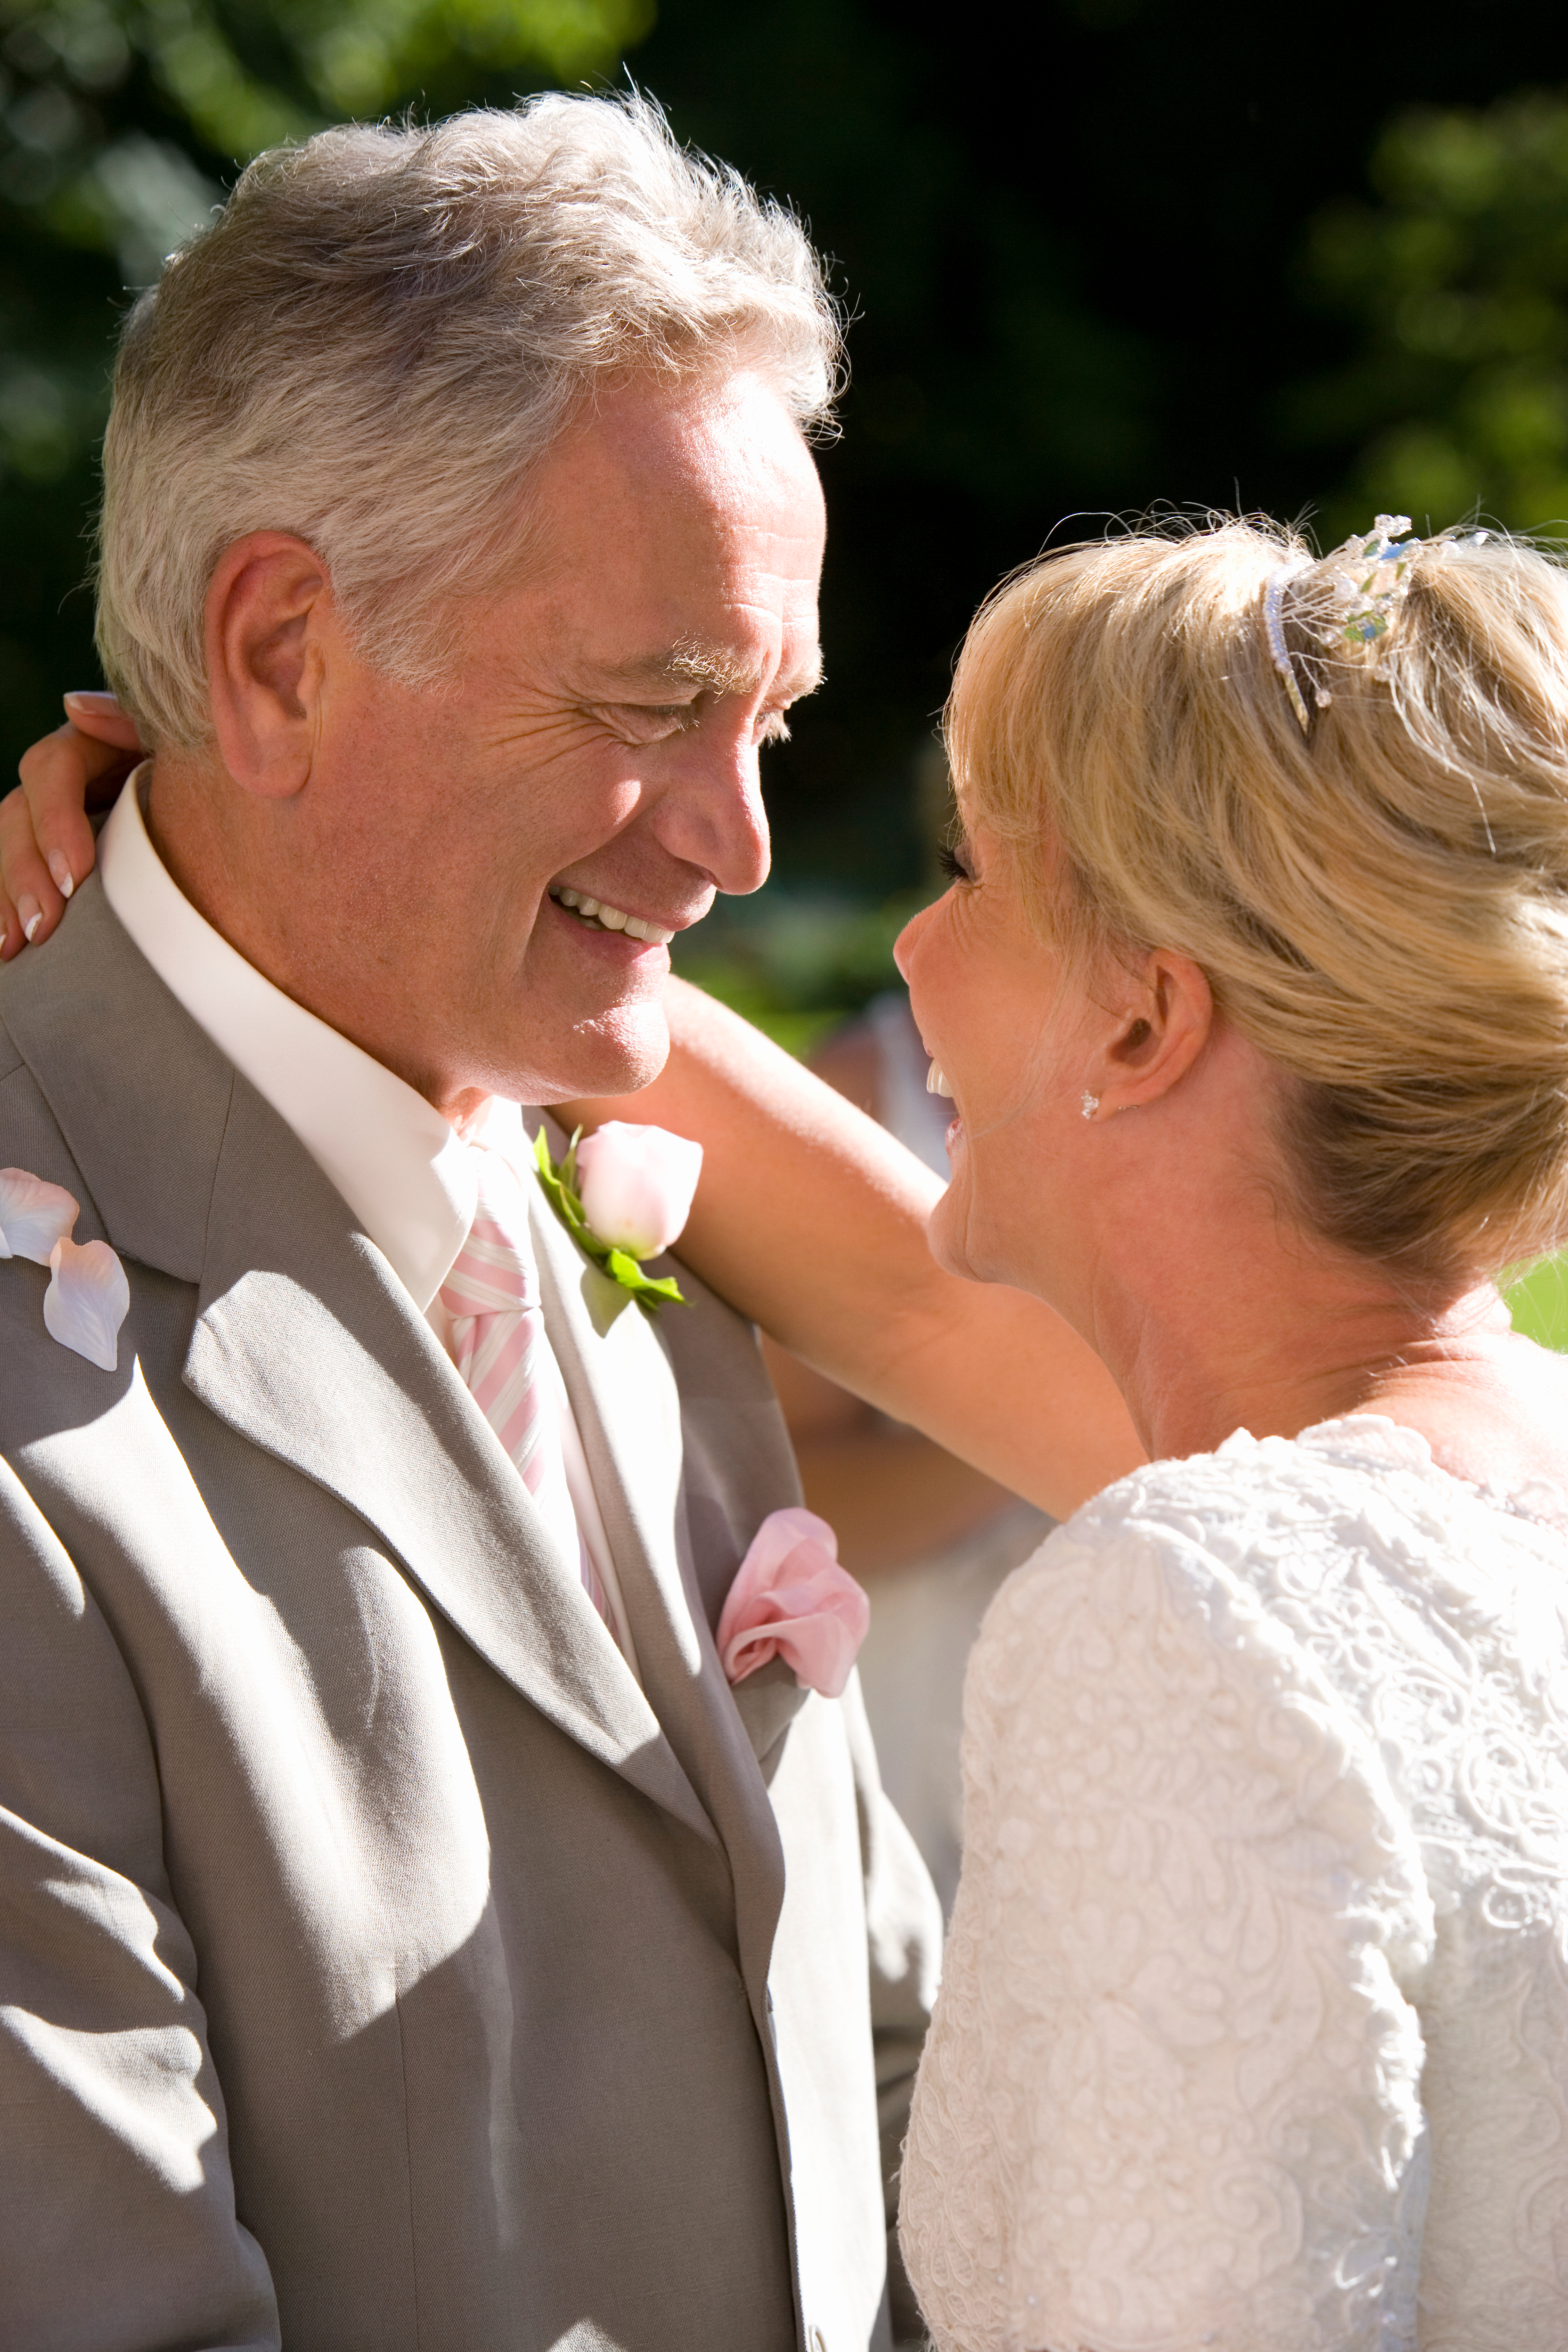 A middle-aged couple got married | Source: Shutterstock